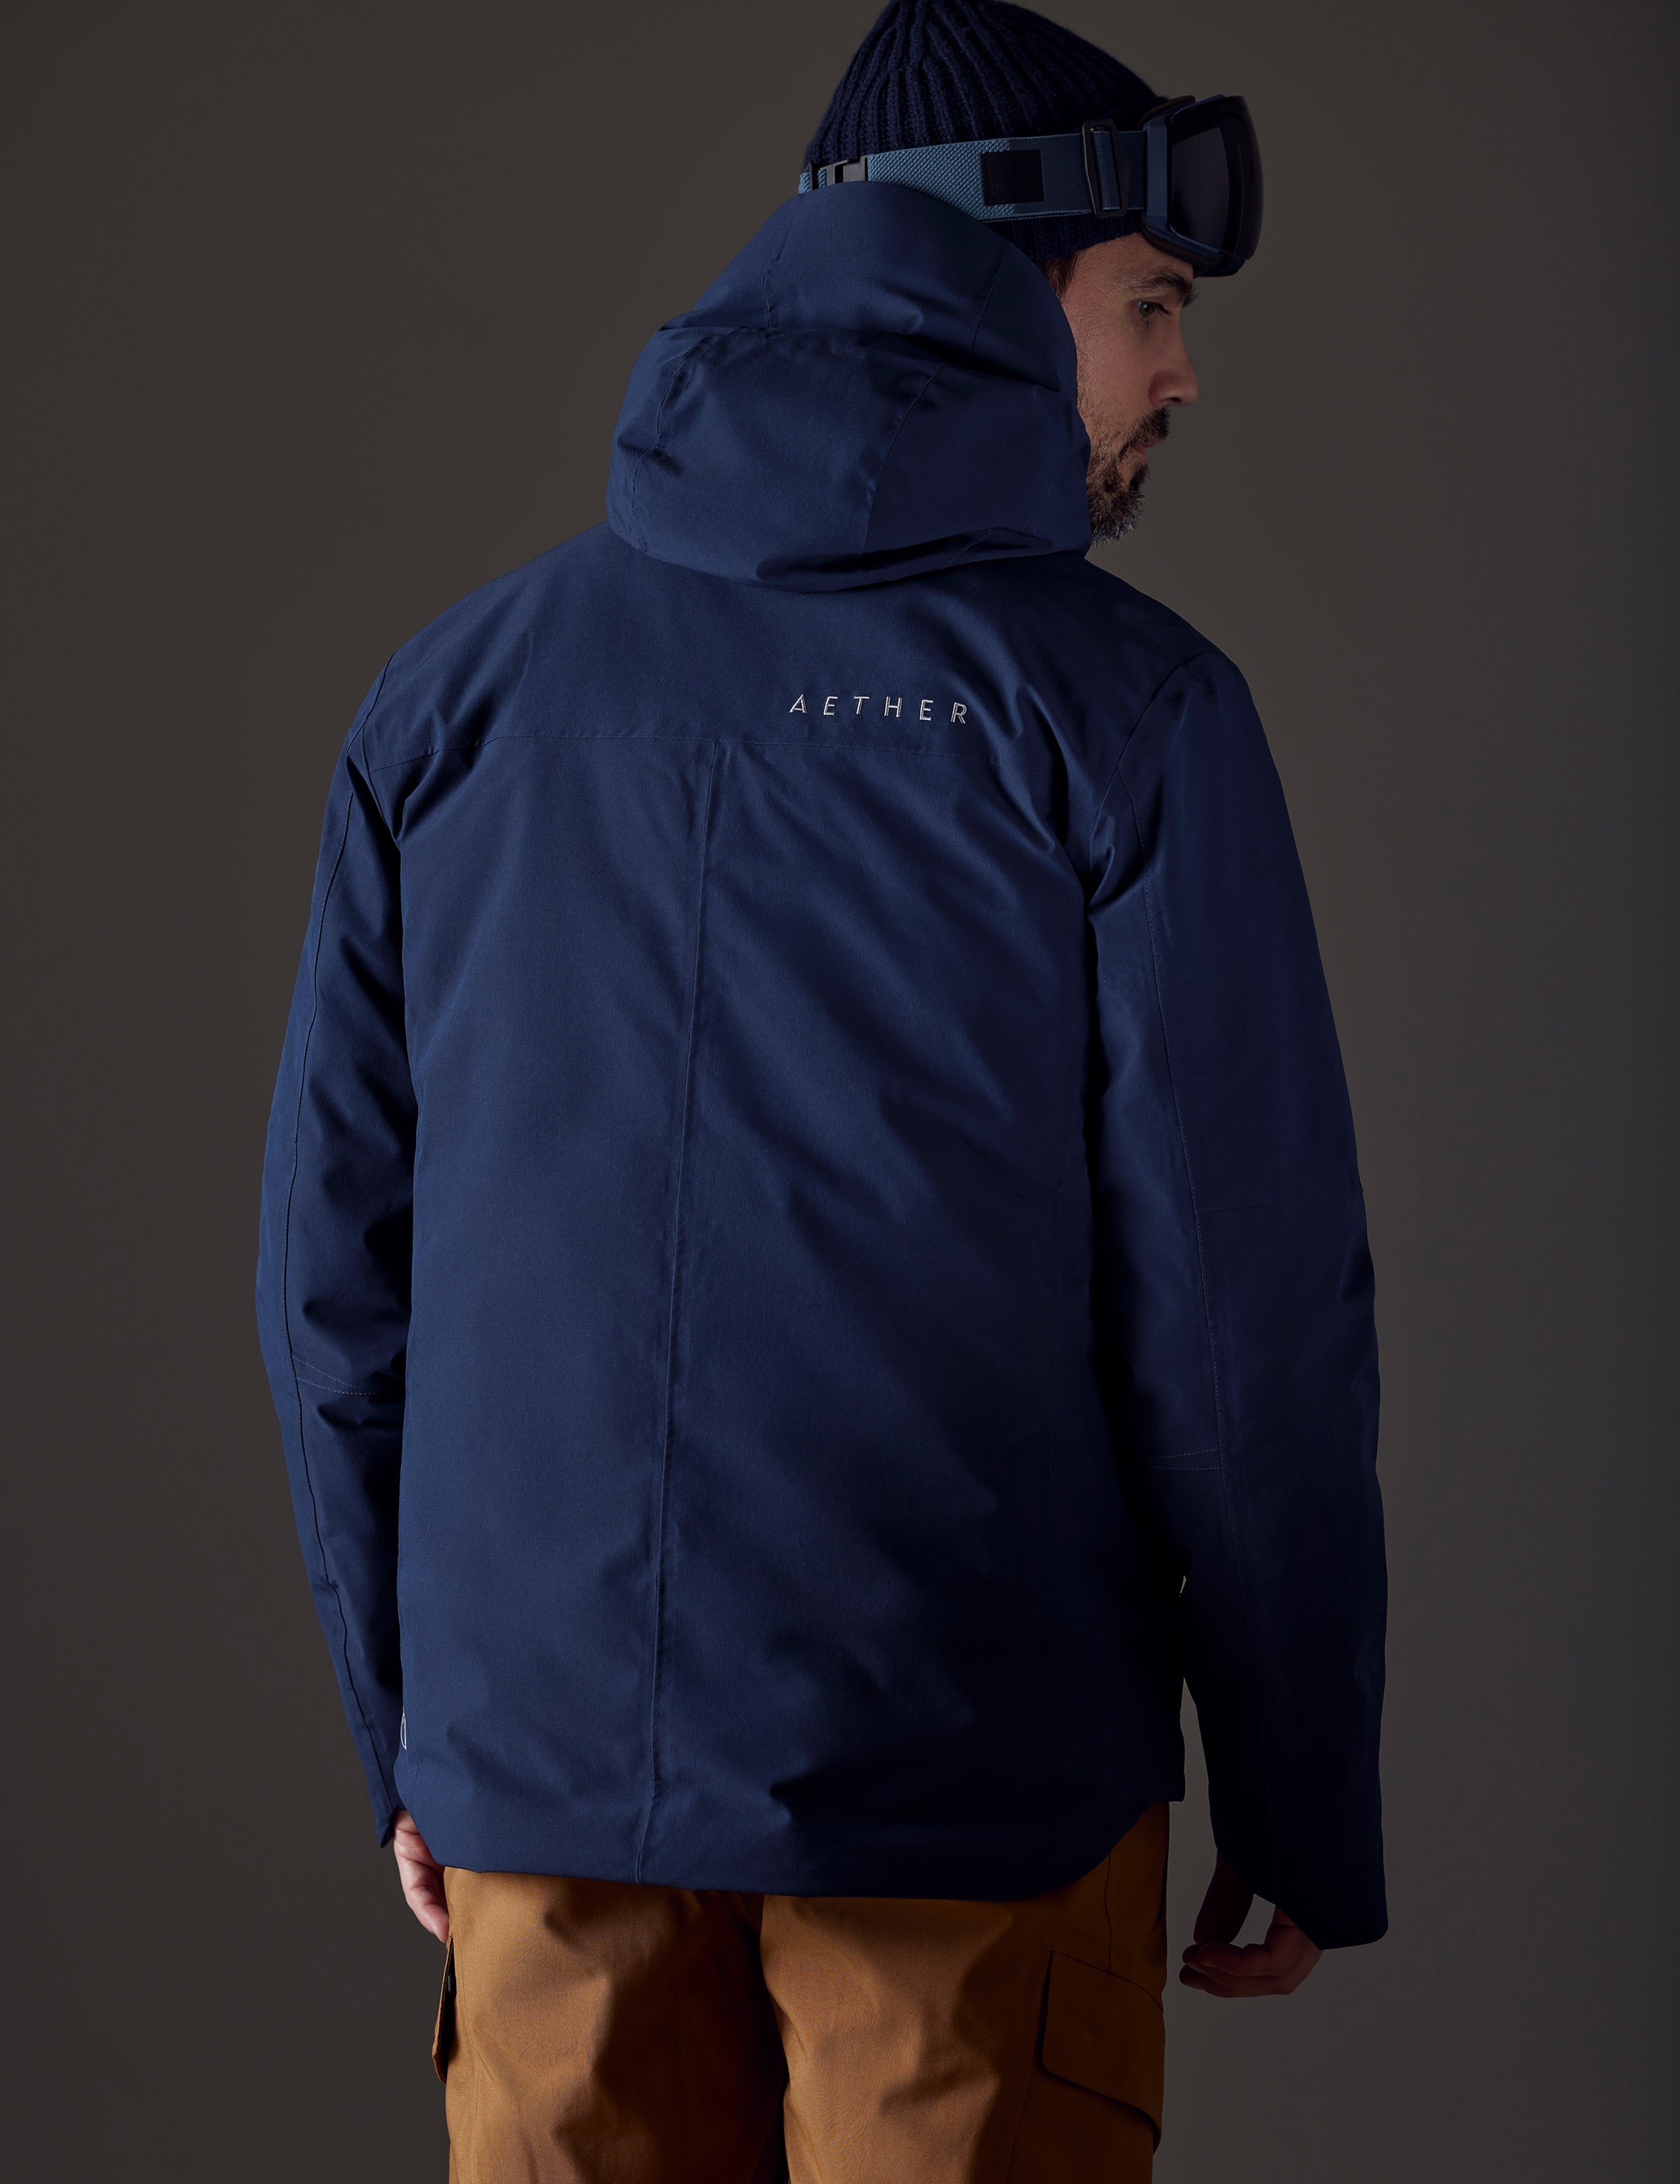 man wearing blue insulated jacket from AETHER Apparel